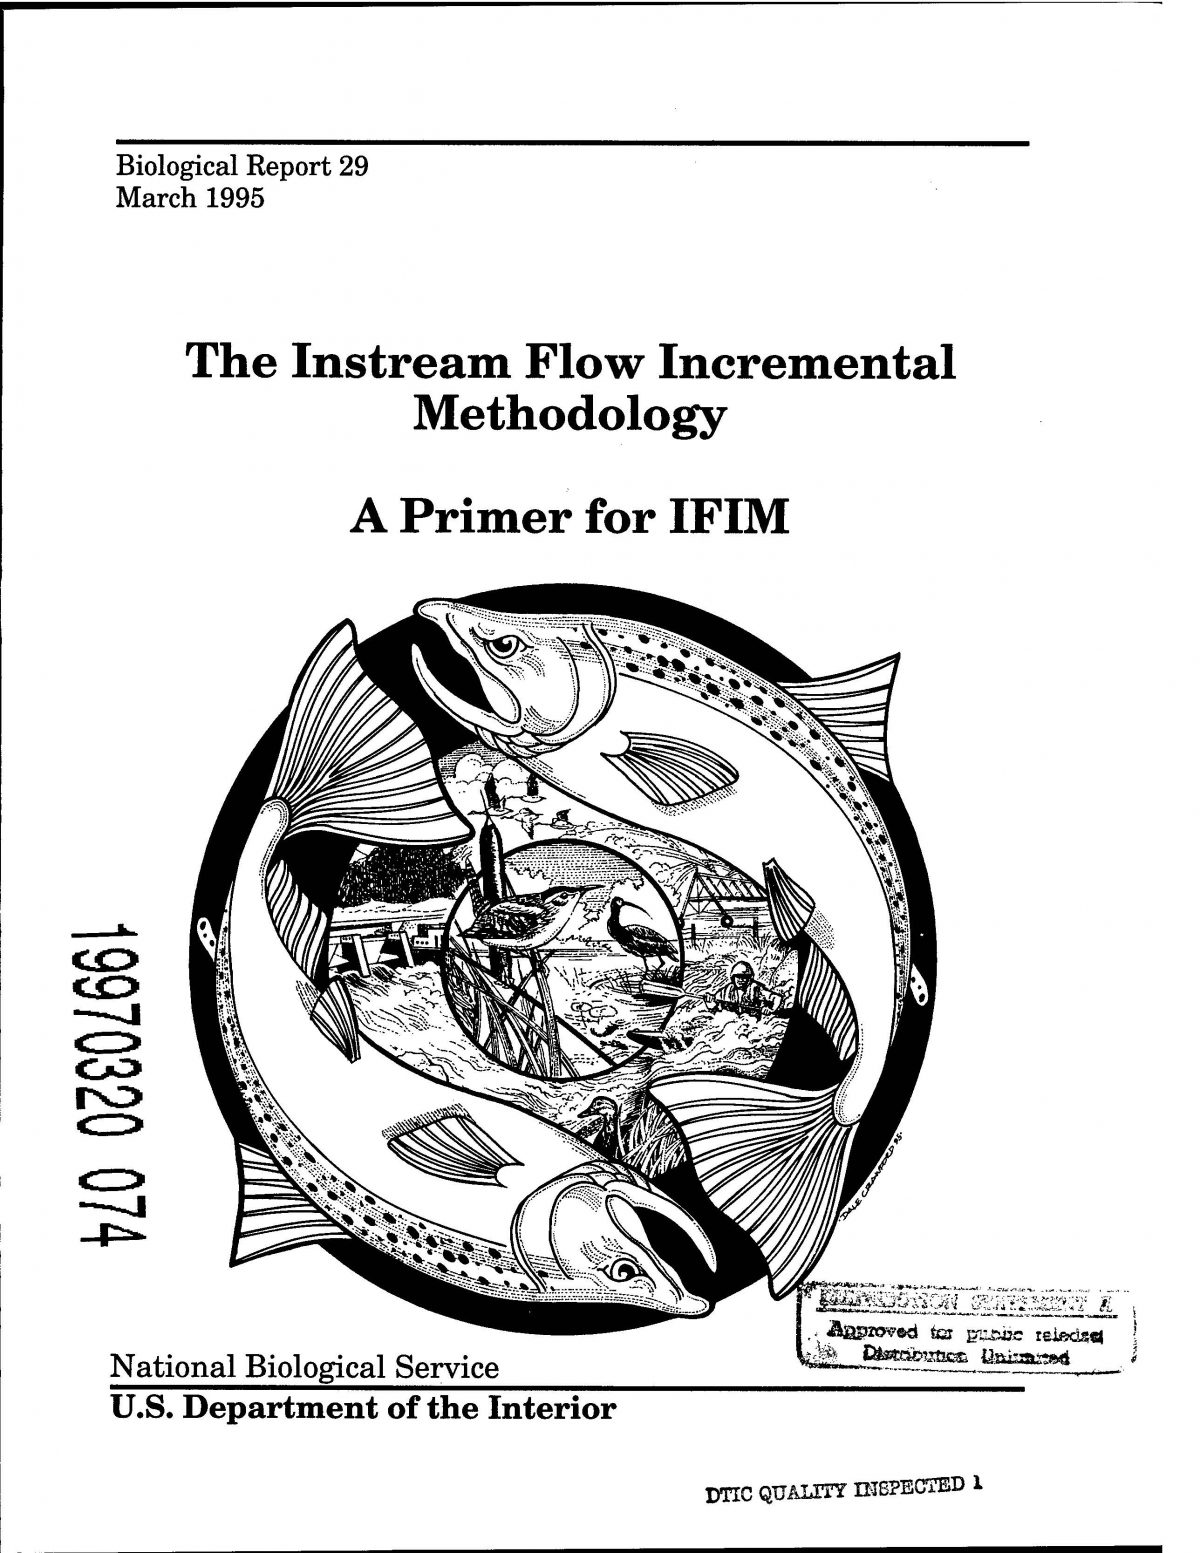 The Instream Flow Incremental Methodology: A Primer for IFIM